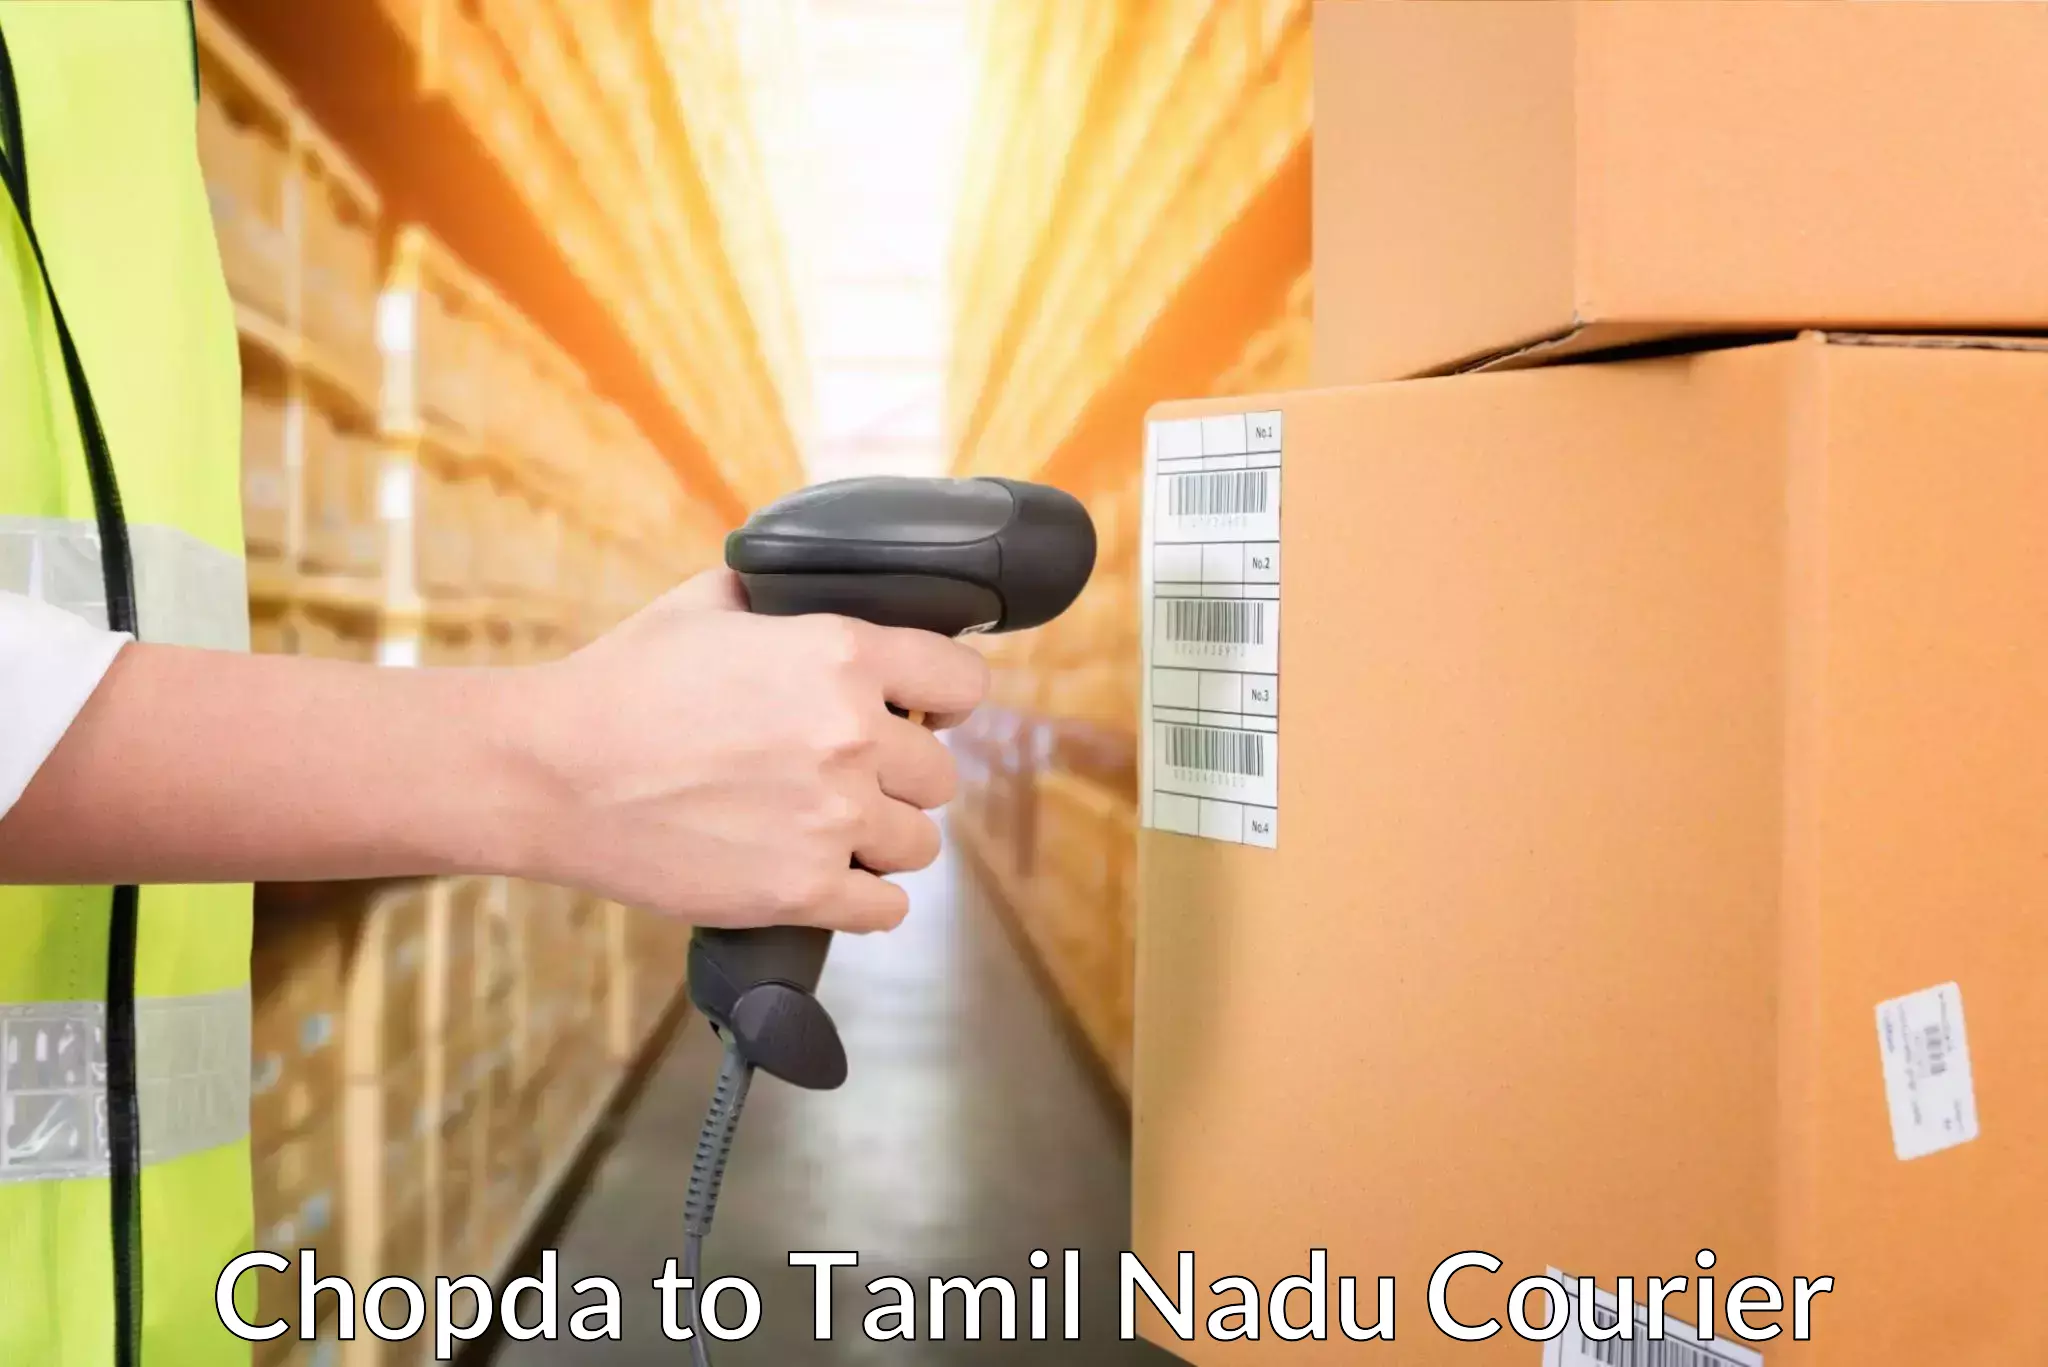 Next-day delivery options Chopda to Ariyalur